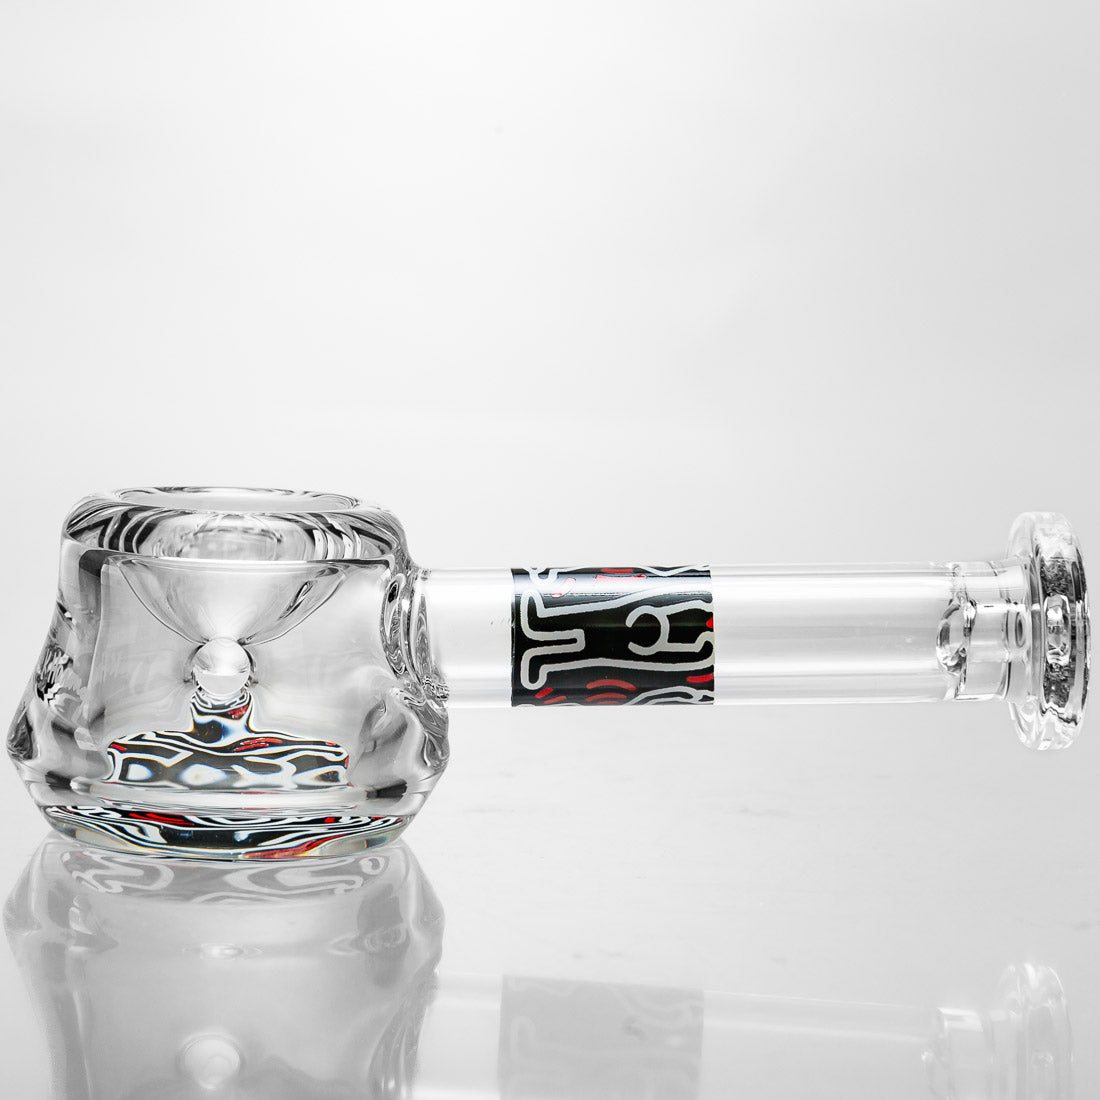 Flower Glass Spoon Pipe Hand Pipe